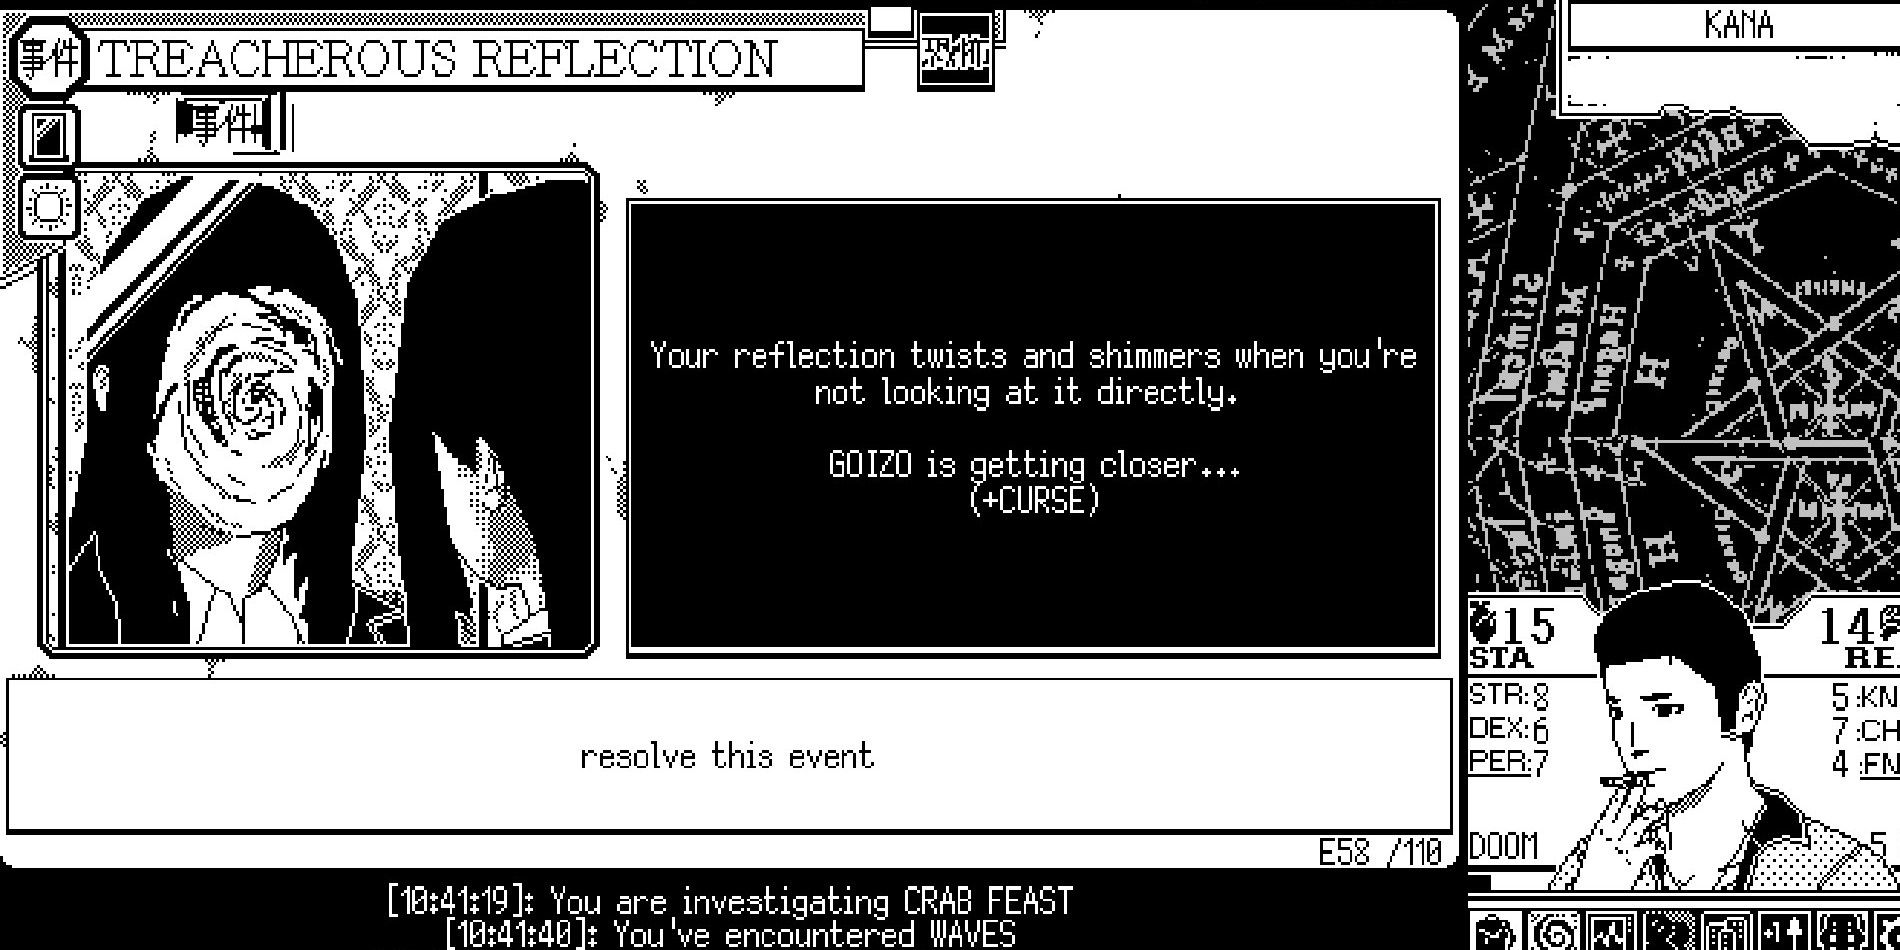 The Treacherous Reflection event in WORLD OF HORROR